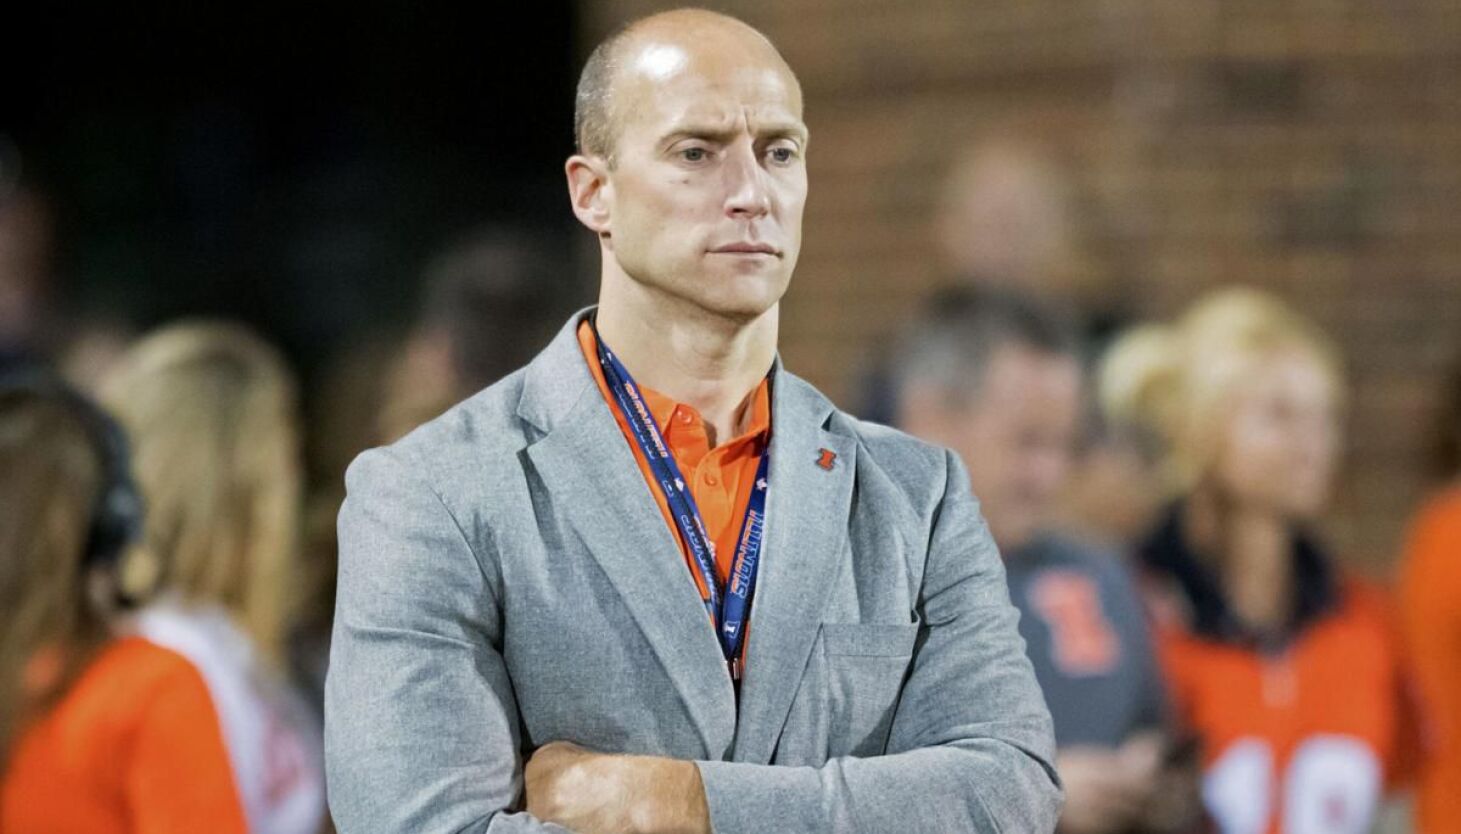 Illini AD Josh Whitman Isn’t Sure NCAA Should Be Governing College Sports: “We have a credibility problem”